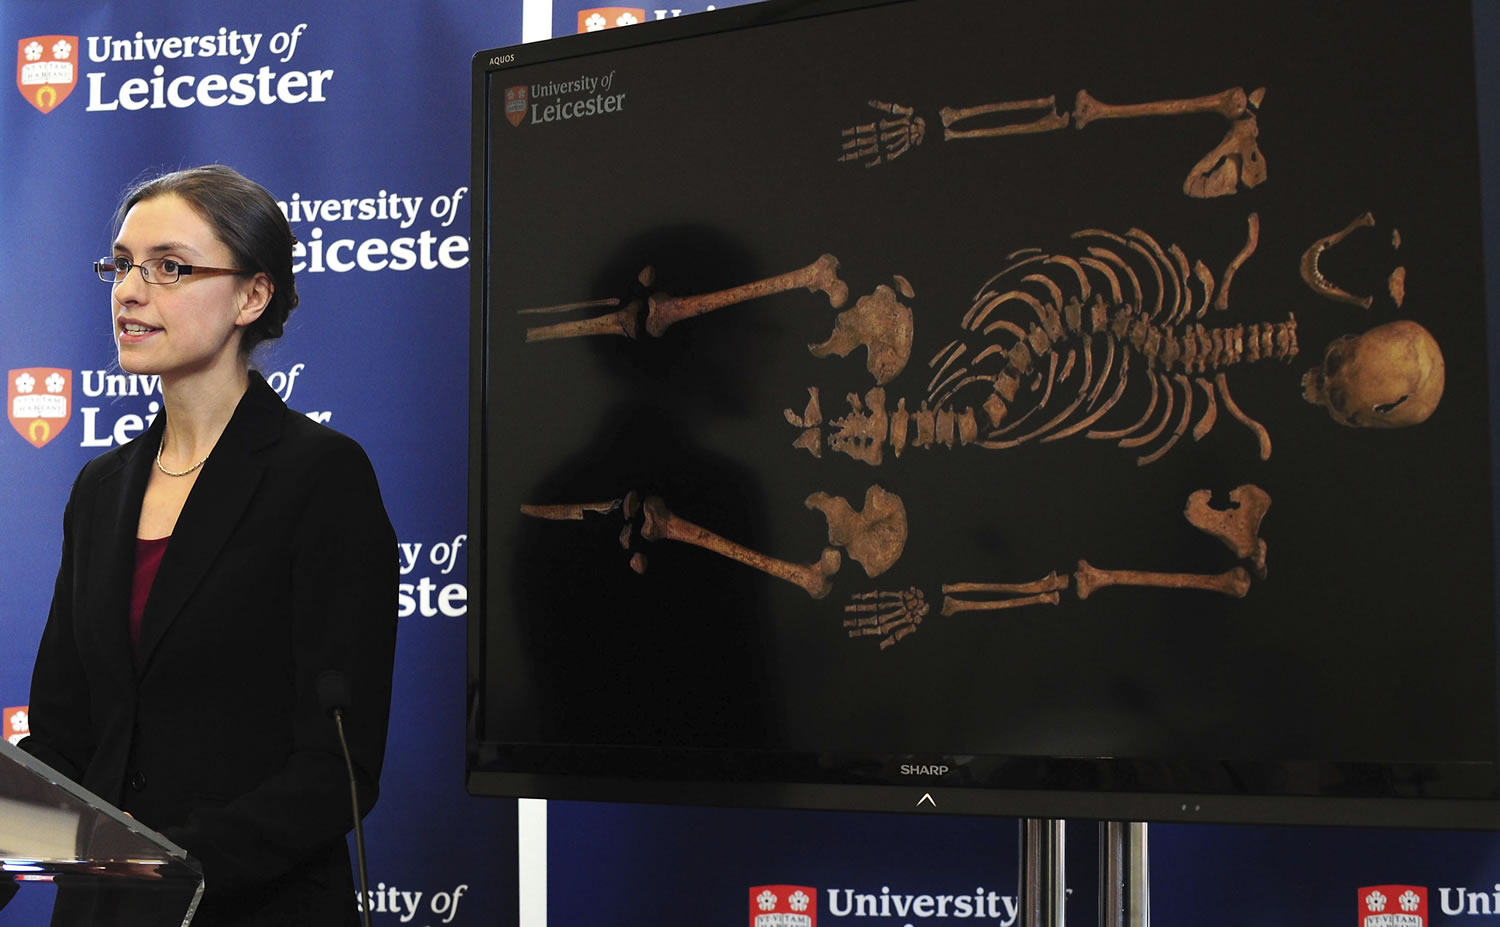 Jo Appleby, a lecturer in Human Bioarchaeology at University of Leicester, School of Archaeology and Ancient History, who led the exhumation of the remains found during a dig at a Leicester car park, speaks at the university Monday.